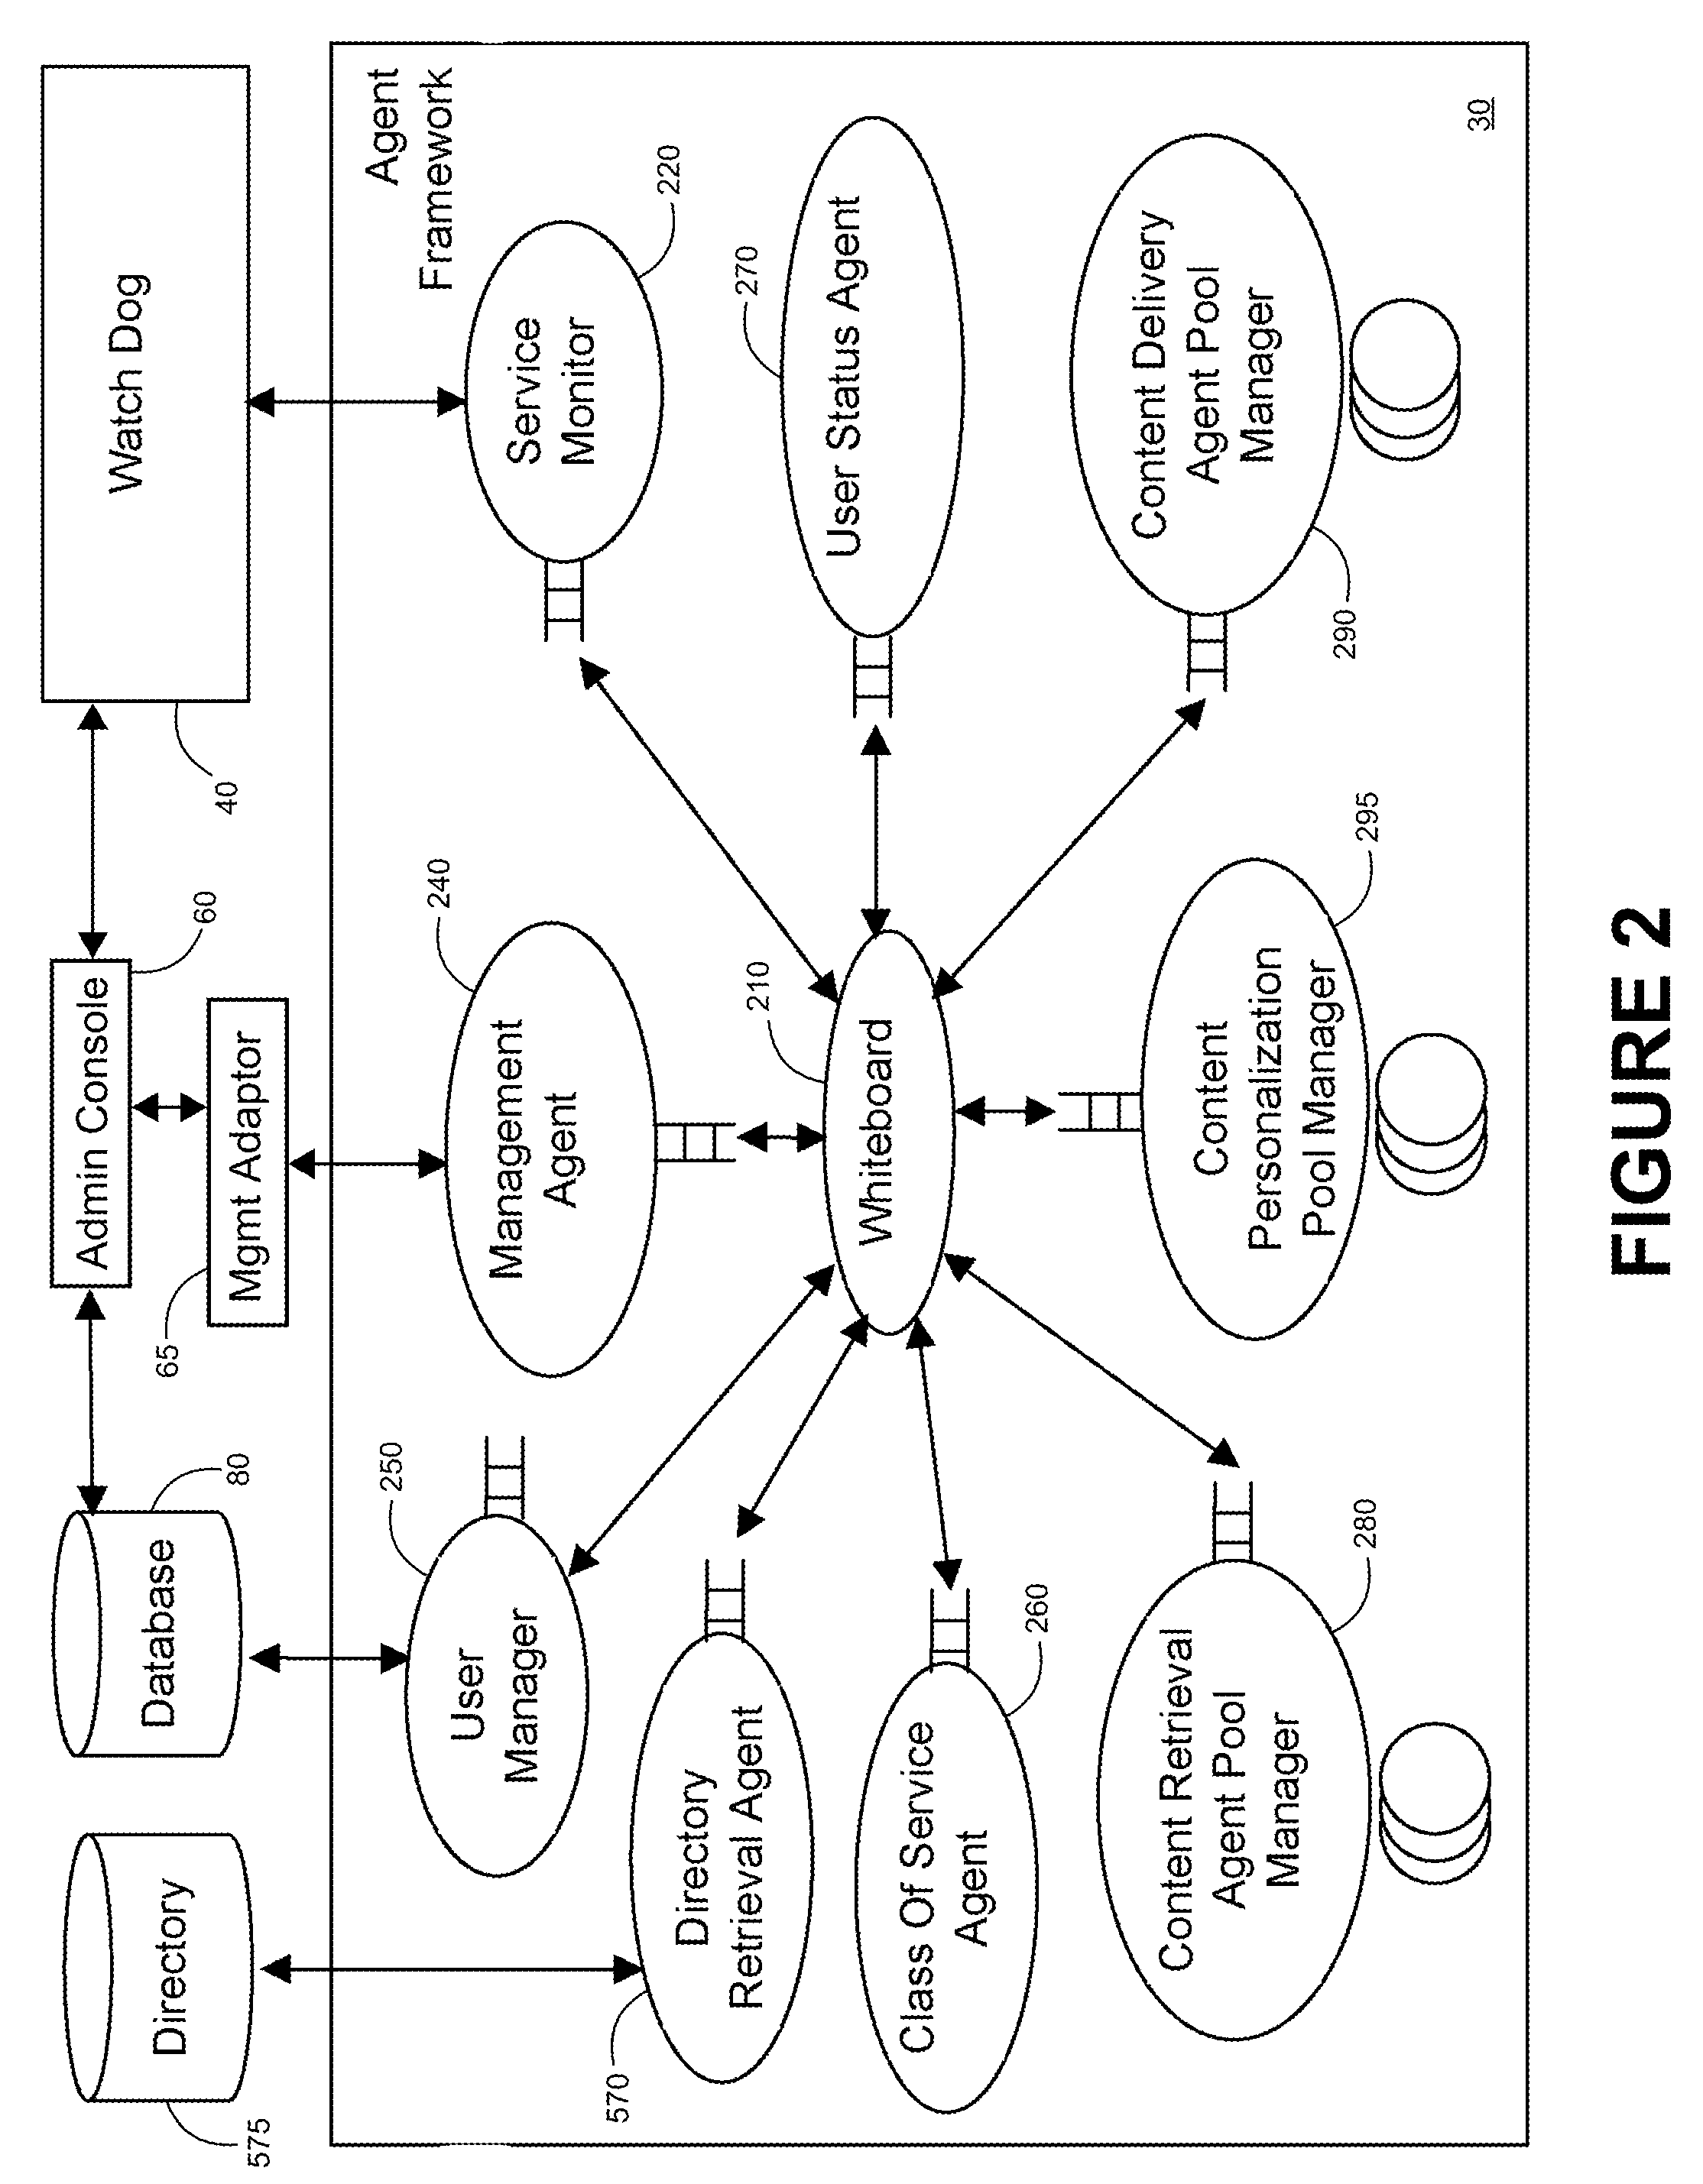 Processing of network content and services for mobile or fixed devices